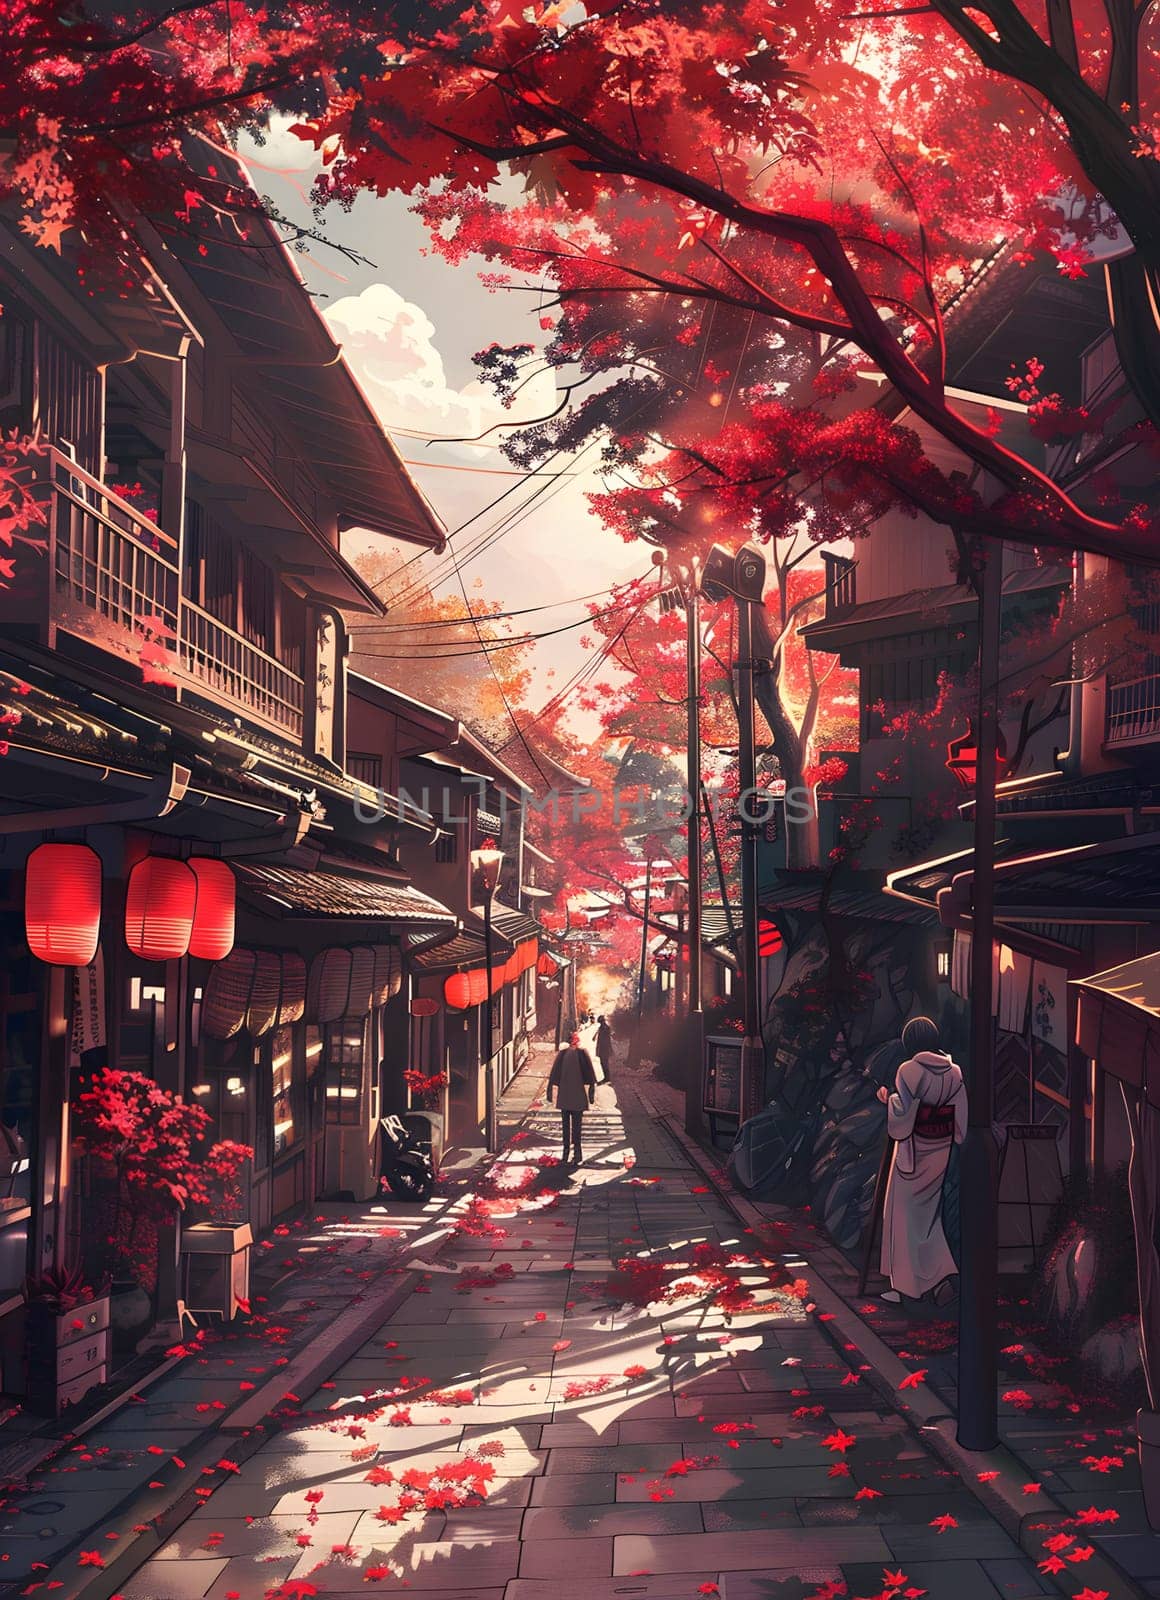 Artistic painting capturing a Japanese town street with red leaves on trees by Nadtochiy